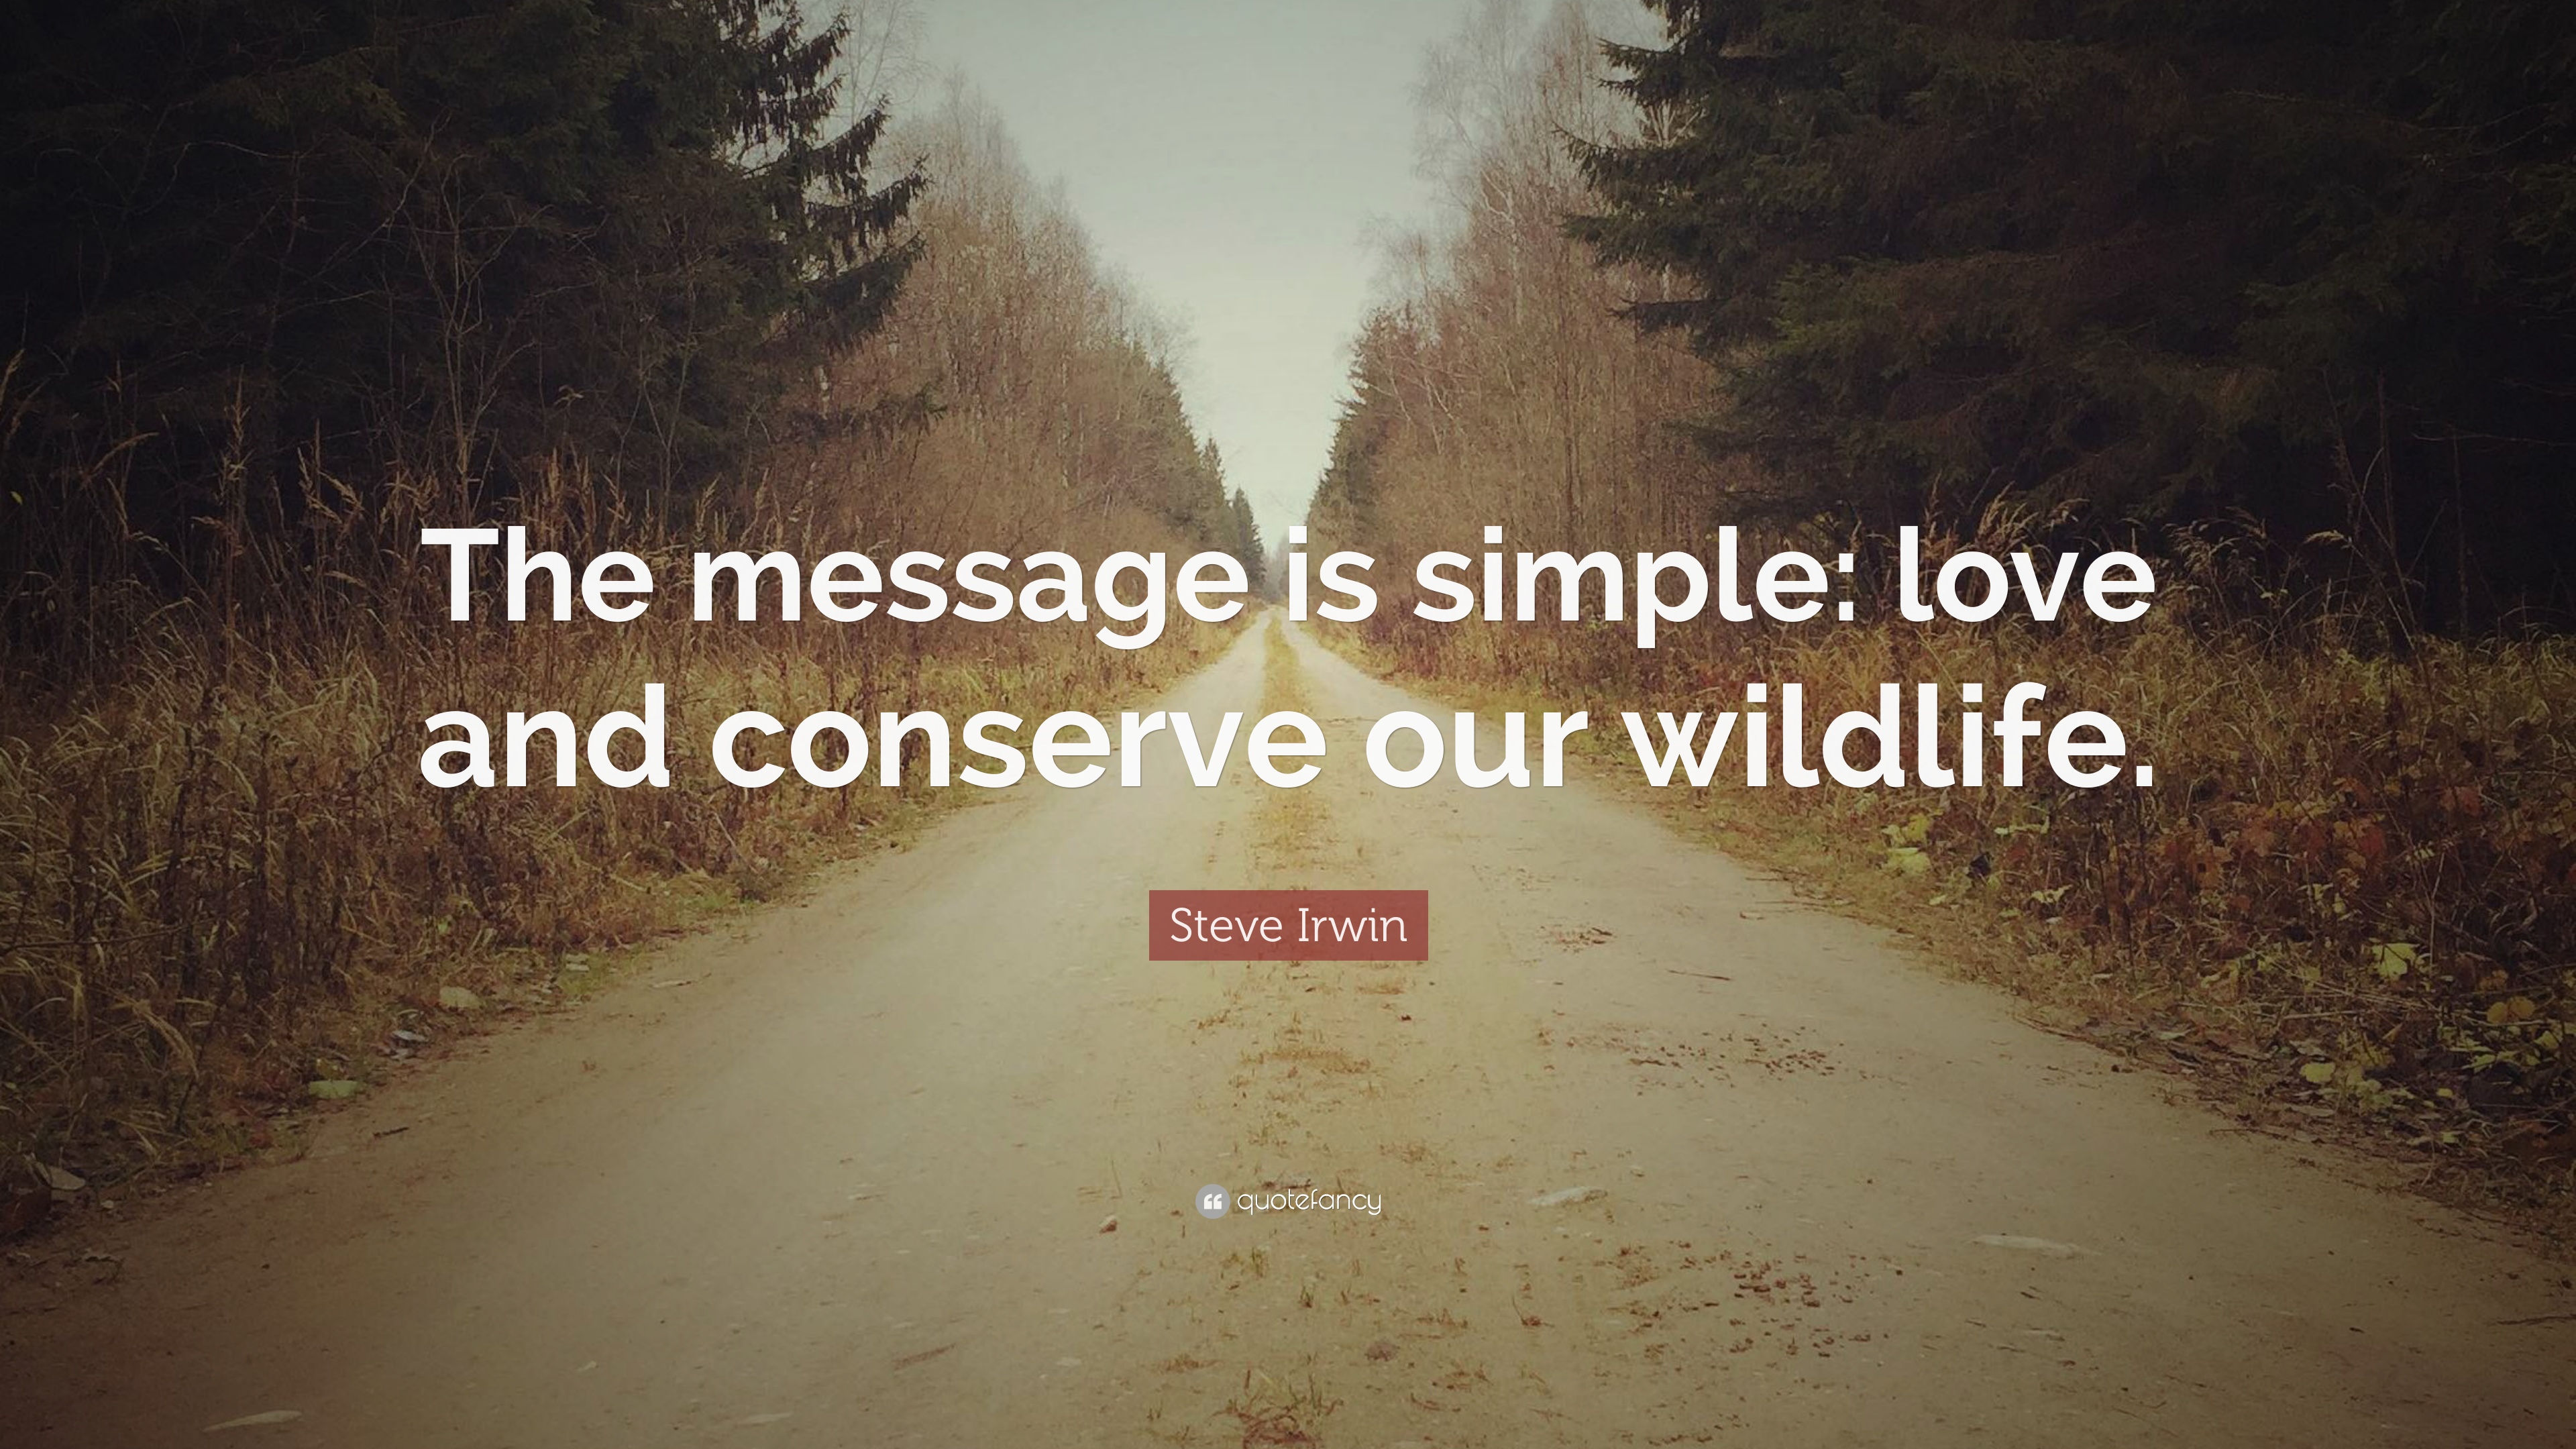 Steve Irwin Quote: “The message is simple: love and conserve